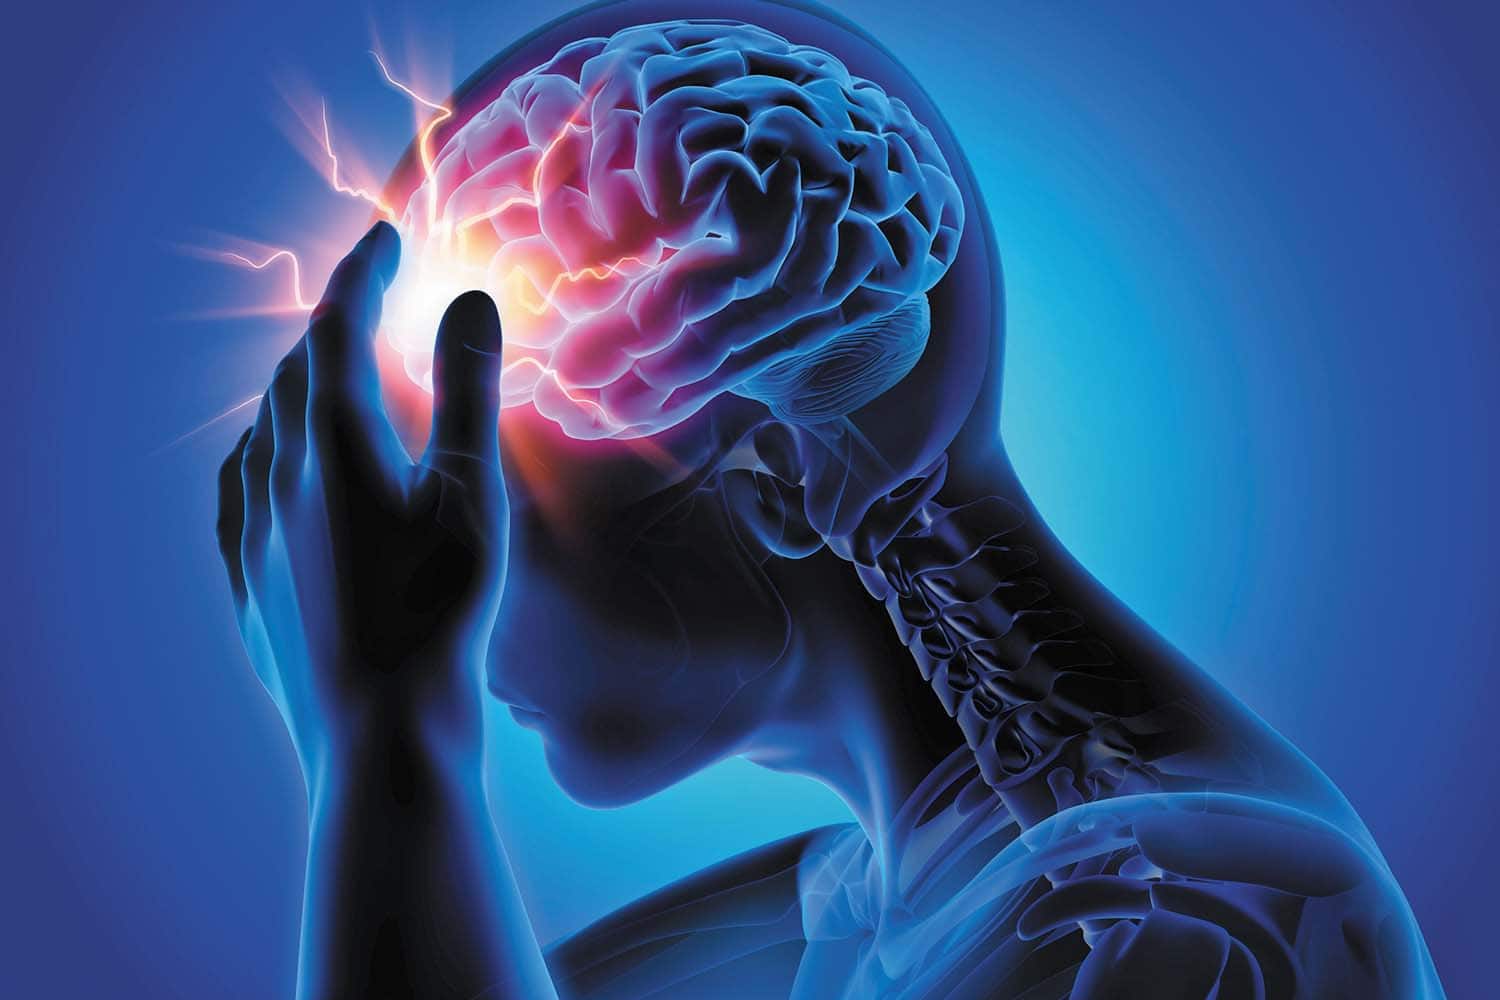 Image of a 3d man figure holding his head. Accidents happen, and when they do, they can often result in traumatic brain injuries. Understanding the different types of traumatic brain injuries can be overwhelming and confusing for individuals and their loved ones. Dealing with a traumatic brain injury is not only physically and emotionally challenging but also financially burdensome. Without proper knowledge about the different types of traumatic brain injuries, it can be difficult to navigate the legal process and seek appropriate compensation. R&G Personal Injury Lawyers are here to help you understand the complexities of traumatic brain injuries. Our team of experienced attorneys specializes in personal injury cases, specifically those involving traumatic brain injuries. We will guide you through every step of the legal process, ensuring you receive the compensation you deserve for medical expenses, lost wages, and pain and suffering. With R&G Personal Injury Lawyers by your side, you can have peace of mind knowing that your case is in capable hands. Contact us today for a free consultation to discuss your claim and learn more about how we can help you!